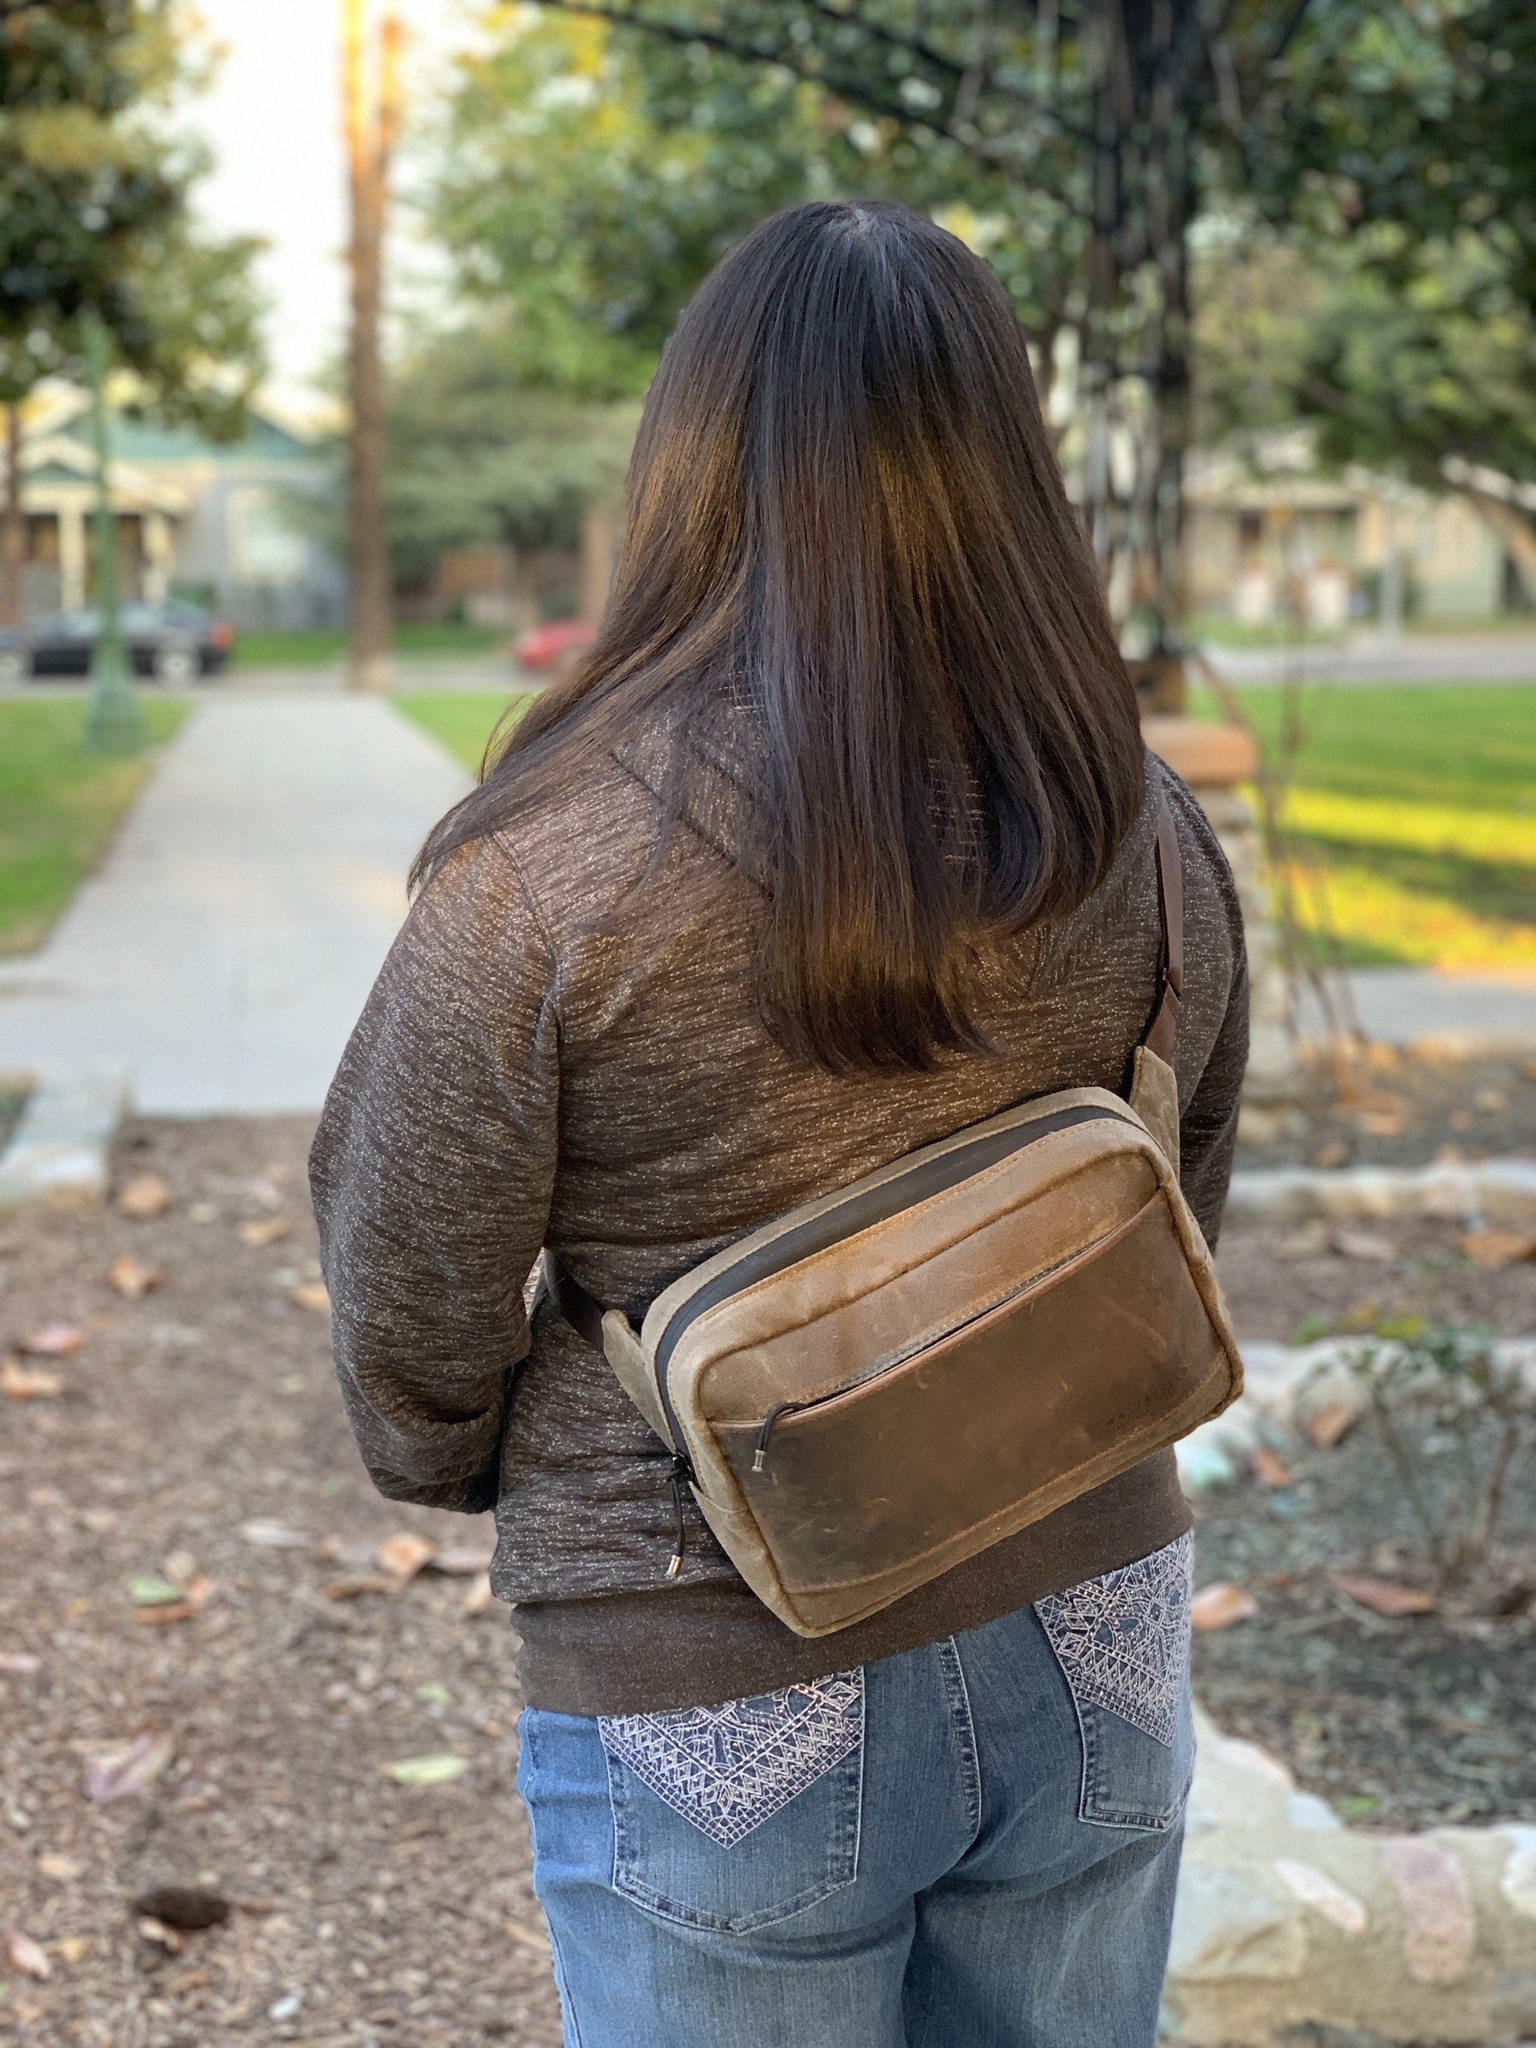 Waterfield Designs Sutter Sling Pouch for Nintendo Switch as worn by Christine Chan